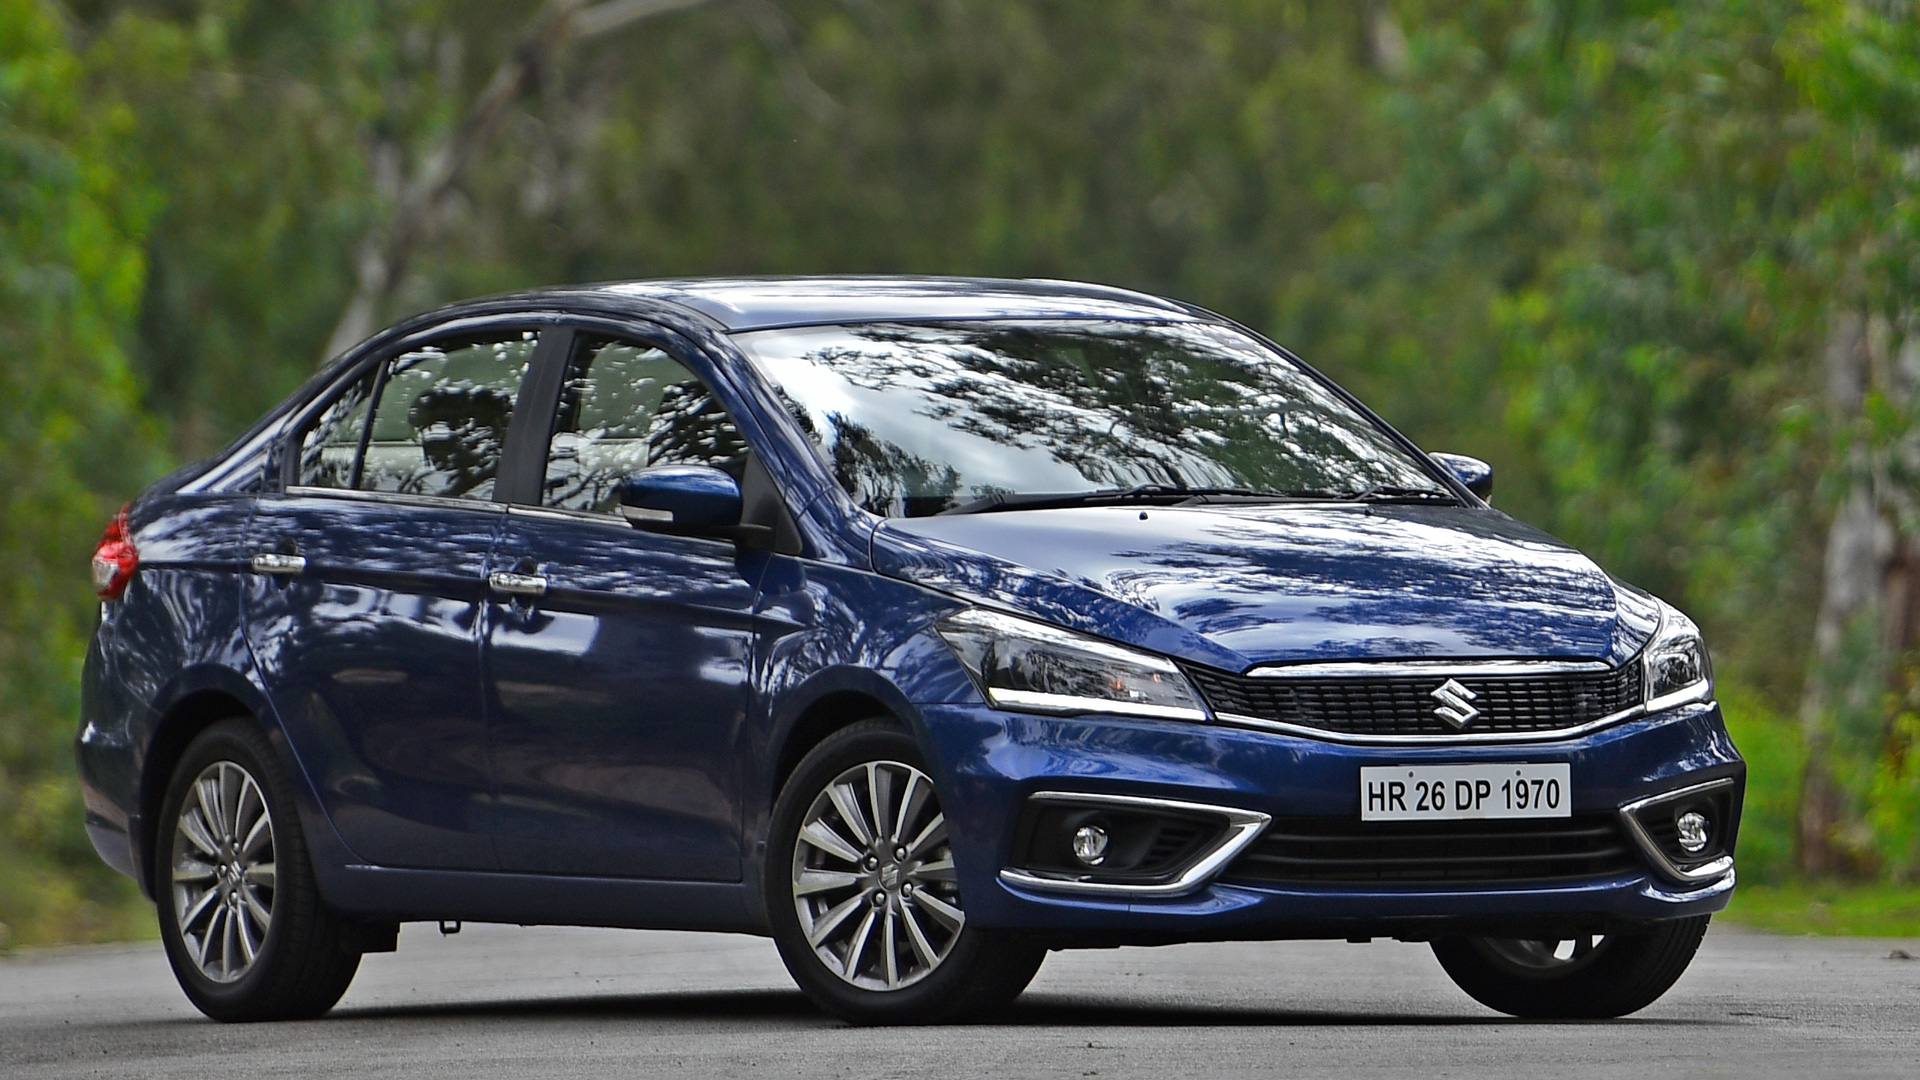  Suzuki  Ciaz  Continues to Create Troubles for its Rivals in 